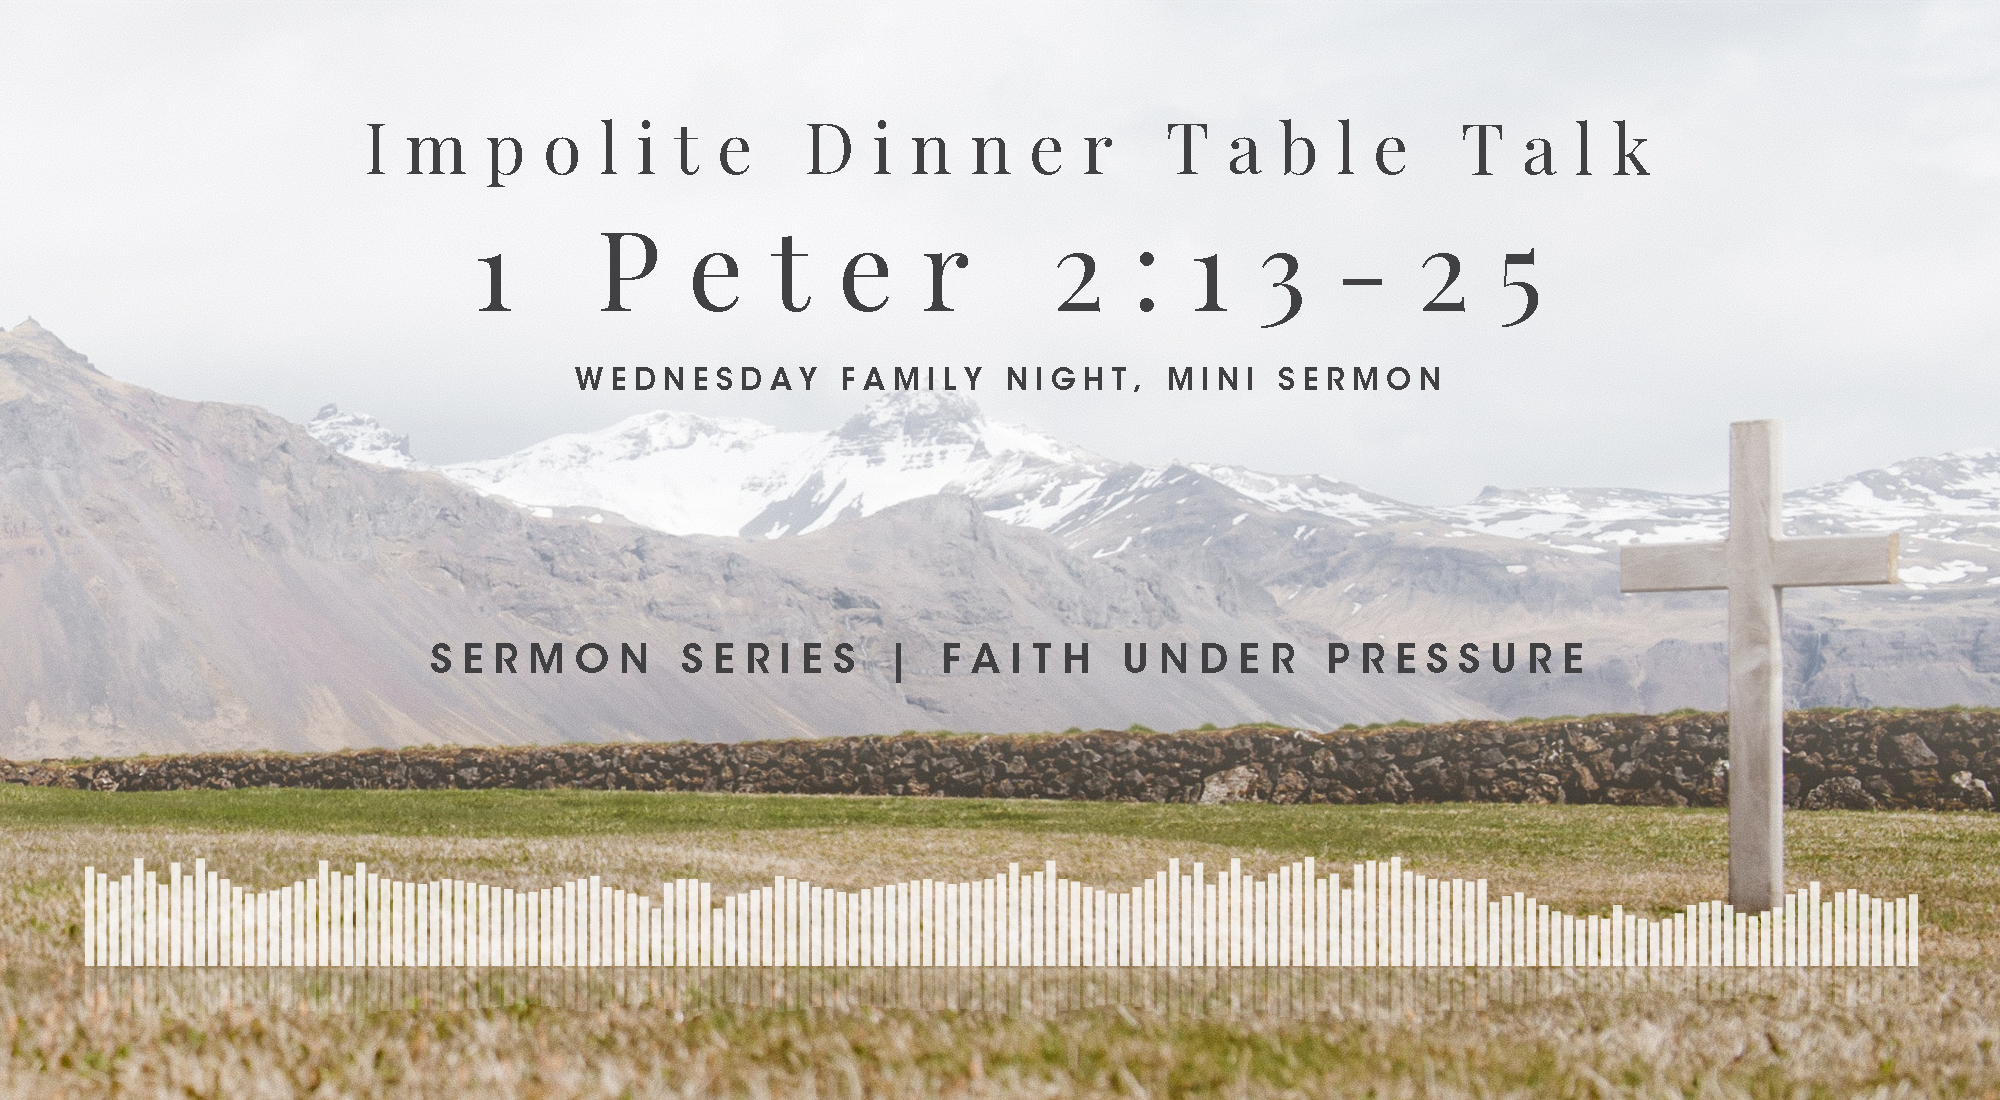 Impolite Dinner Table Talk, A Mini Bible Study in 1 Peter 2:13-25, From Our Faith Under Pressure Sermon Series, Wyandotte County Christian Church Wednesday Family Night